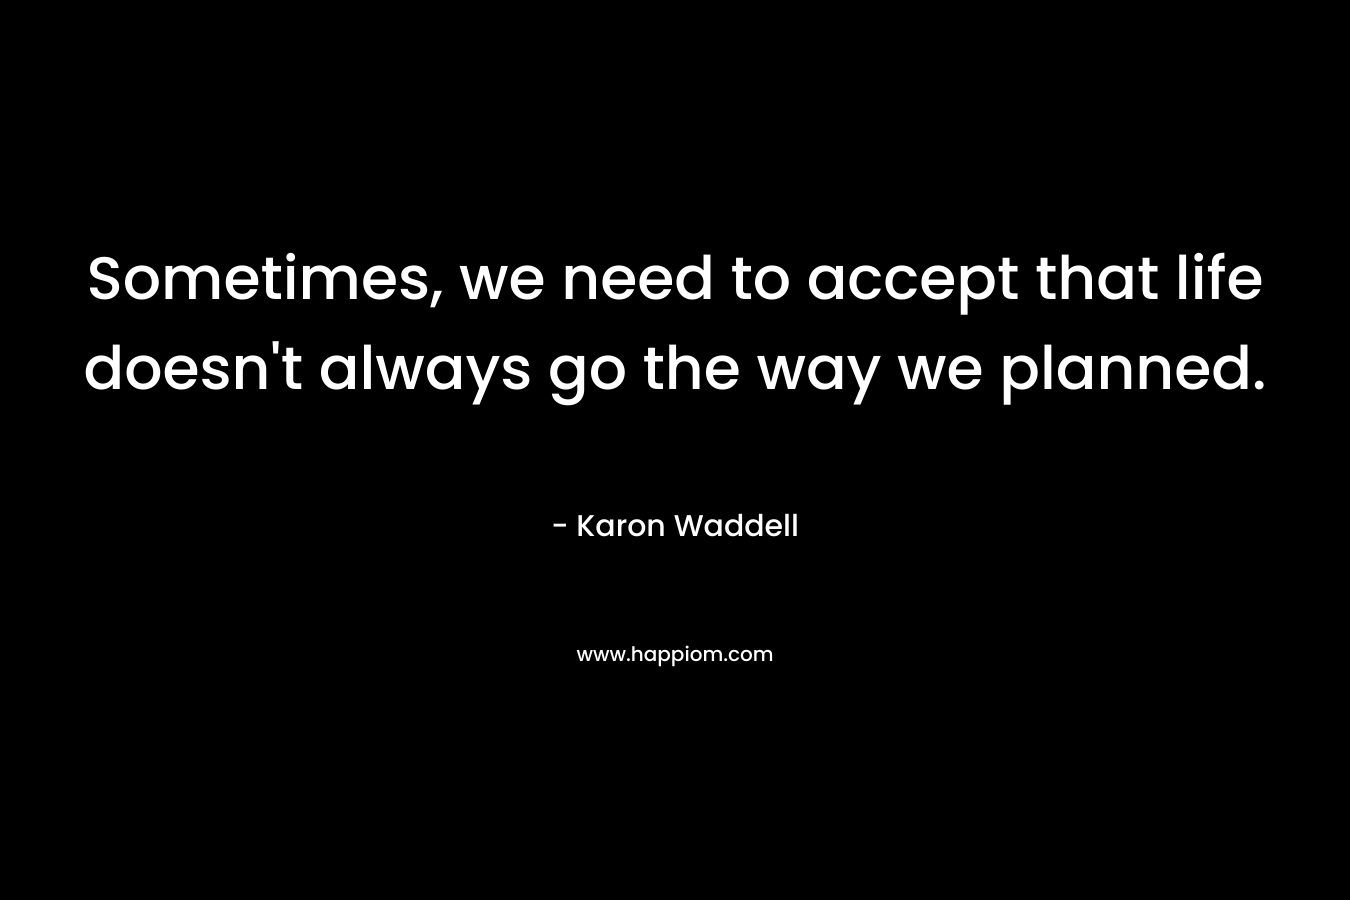 Sometimes, we need to accept that life doesn't always go the way we planned.